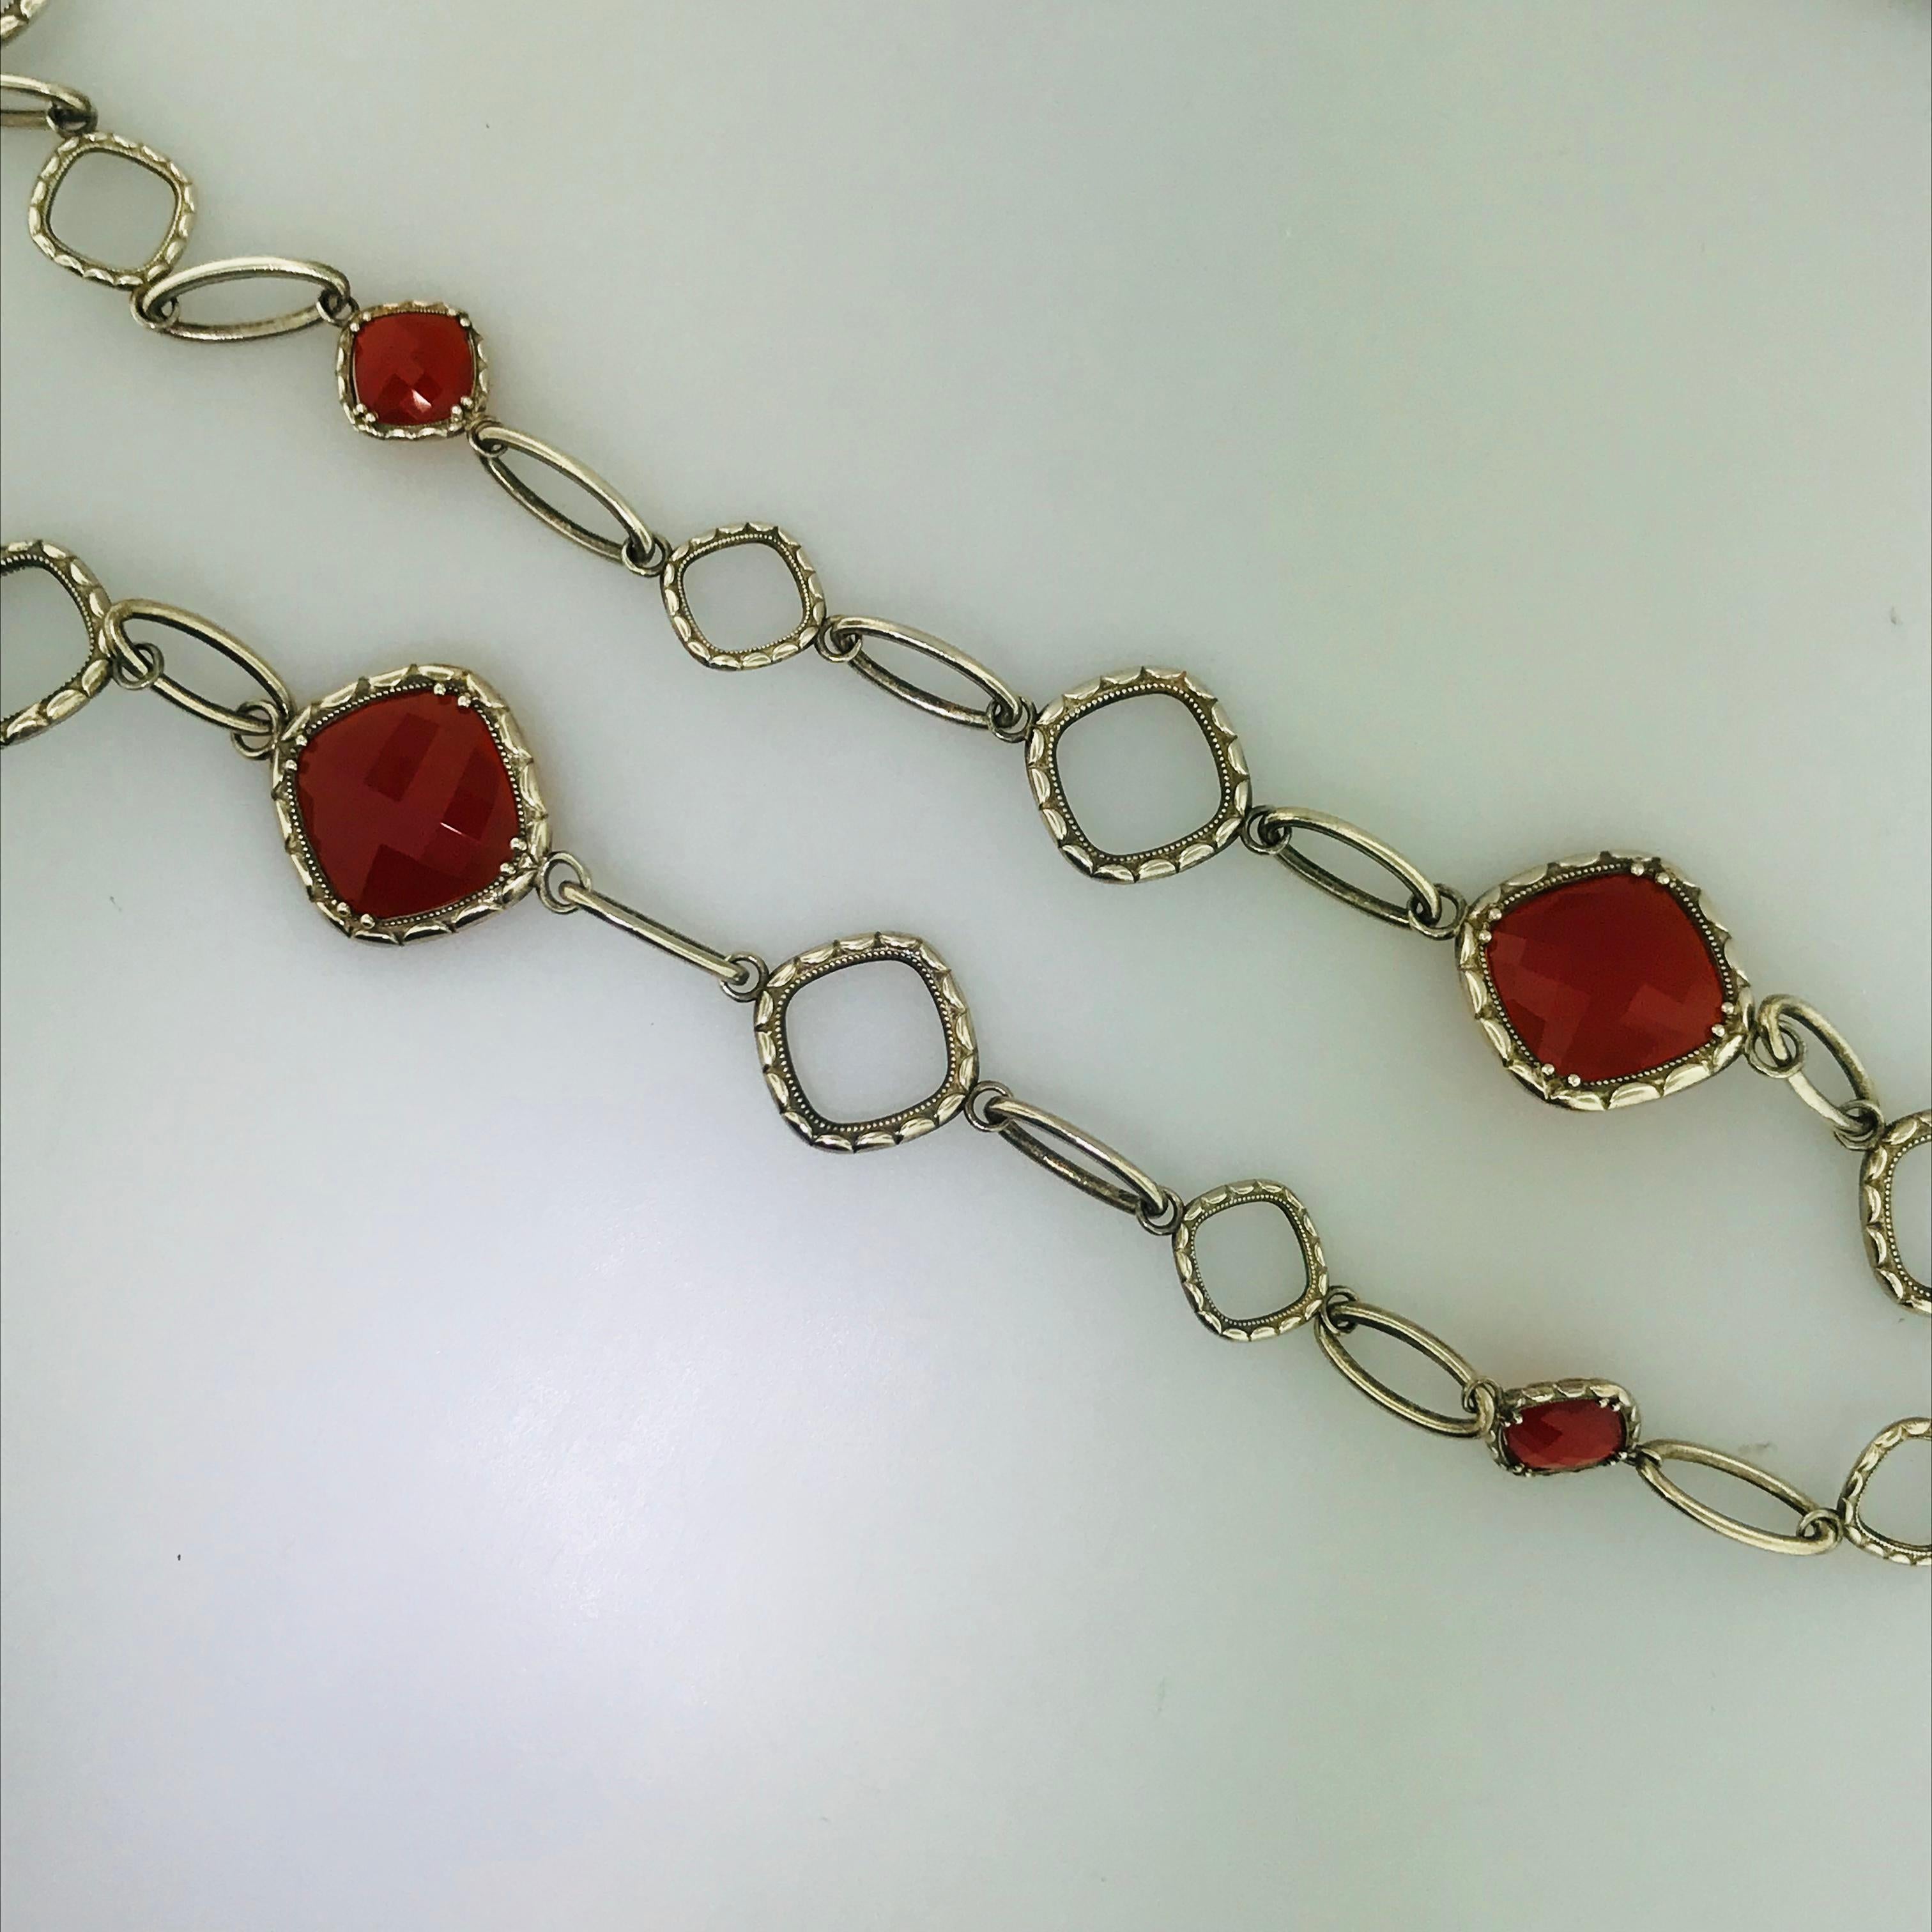 Tacori's original design, the fun bright red onyx and clear quartz station necklace! This necklace has been retired so it is truly rare and valuable! The value of the necklace has increased since you cannot get it from Tacori anymore!
The Tacori gem